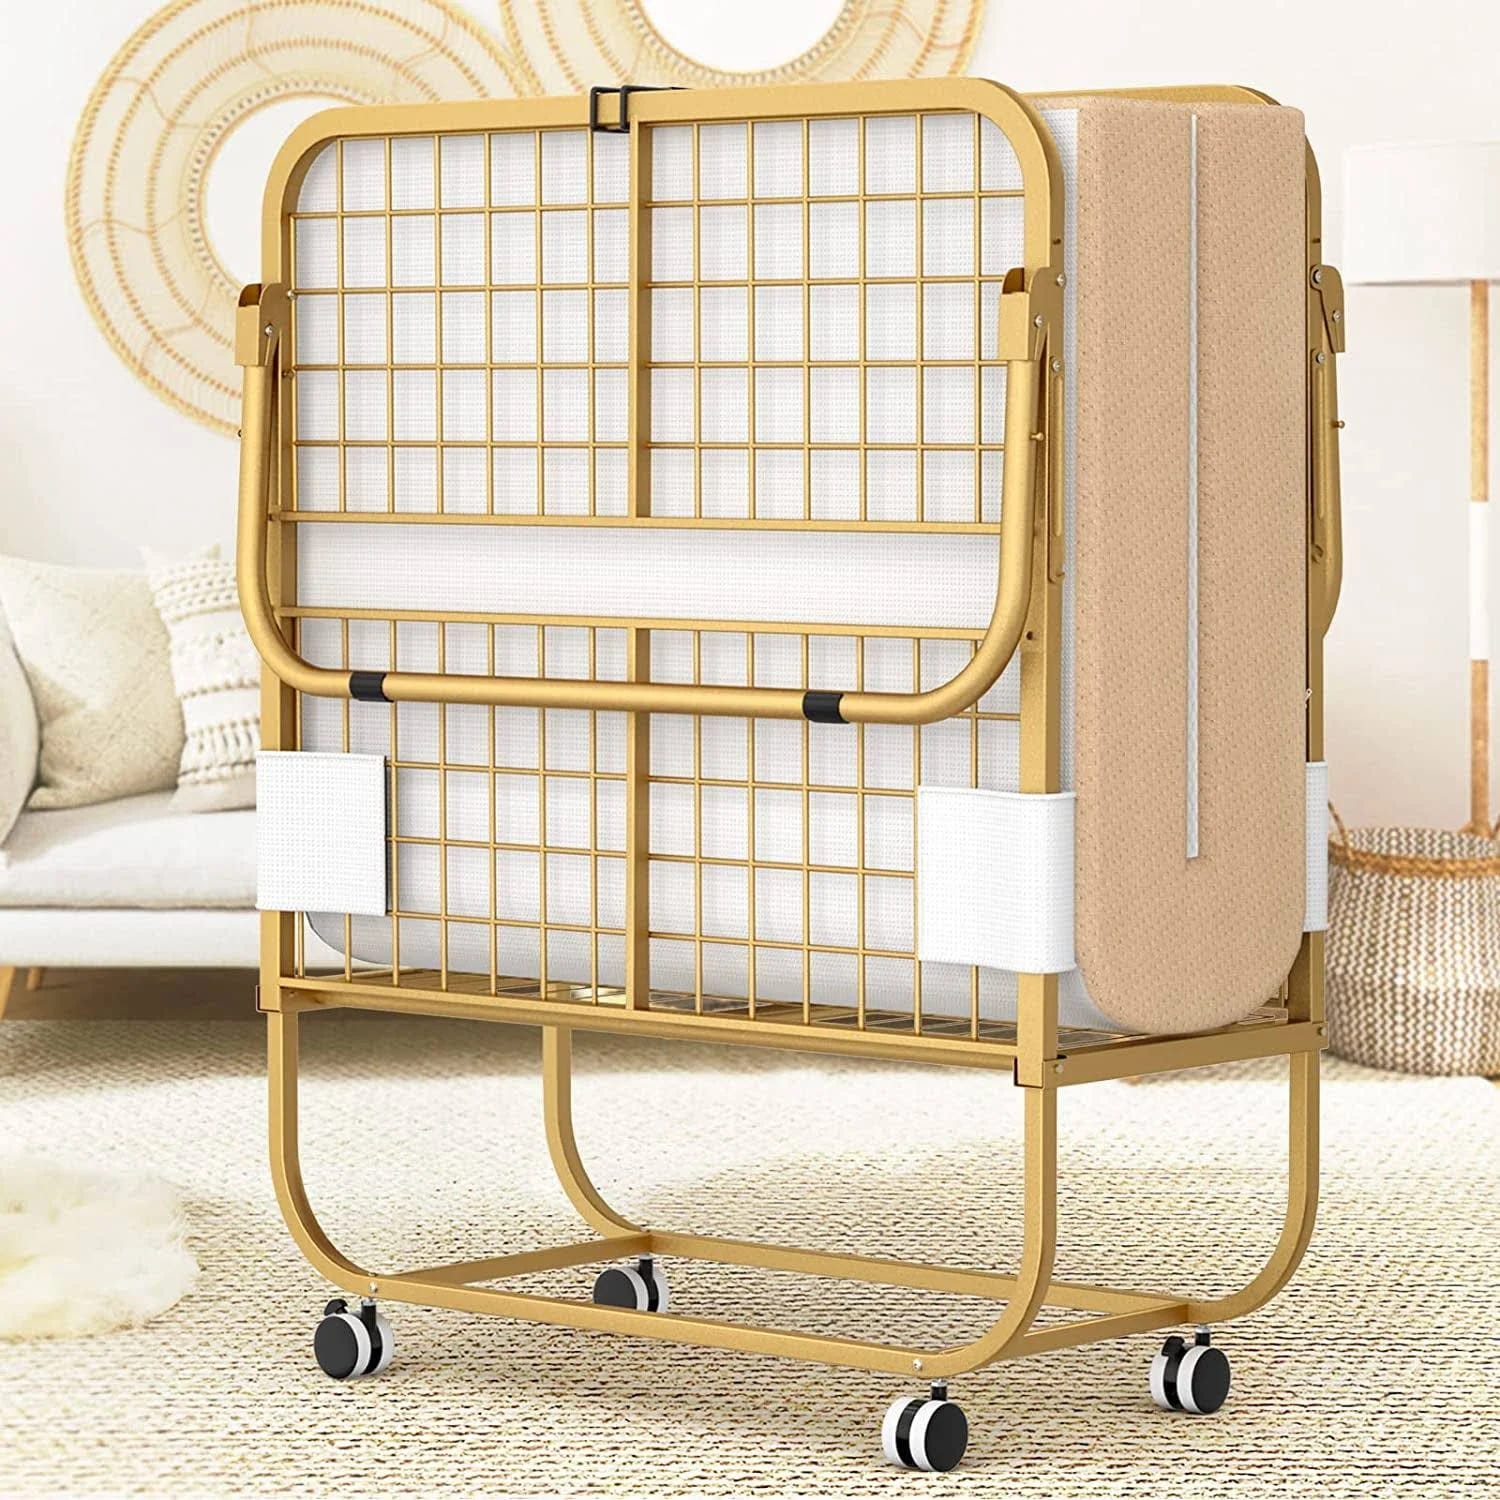 Portable Foldable Gold Bed with Memory Foam Mattress | Image